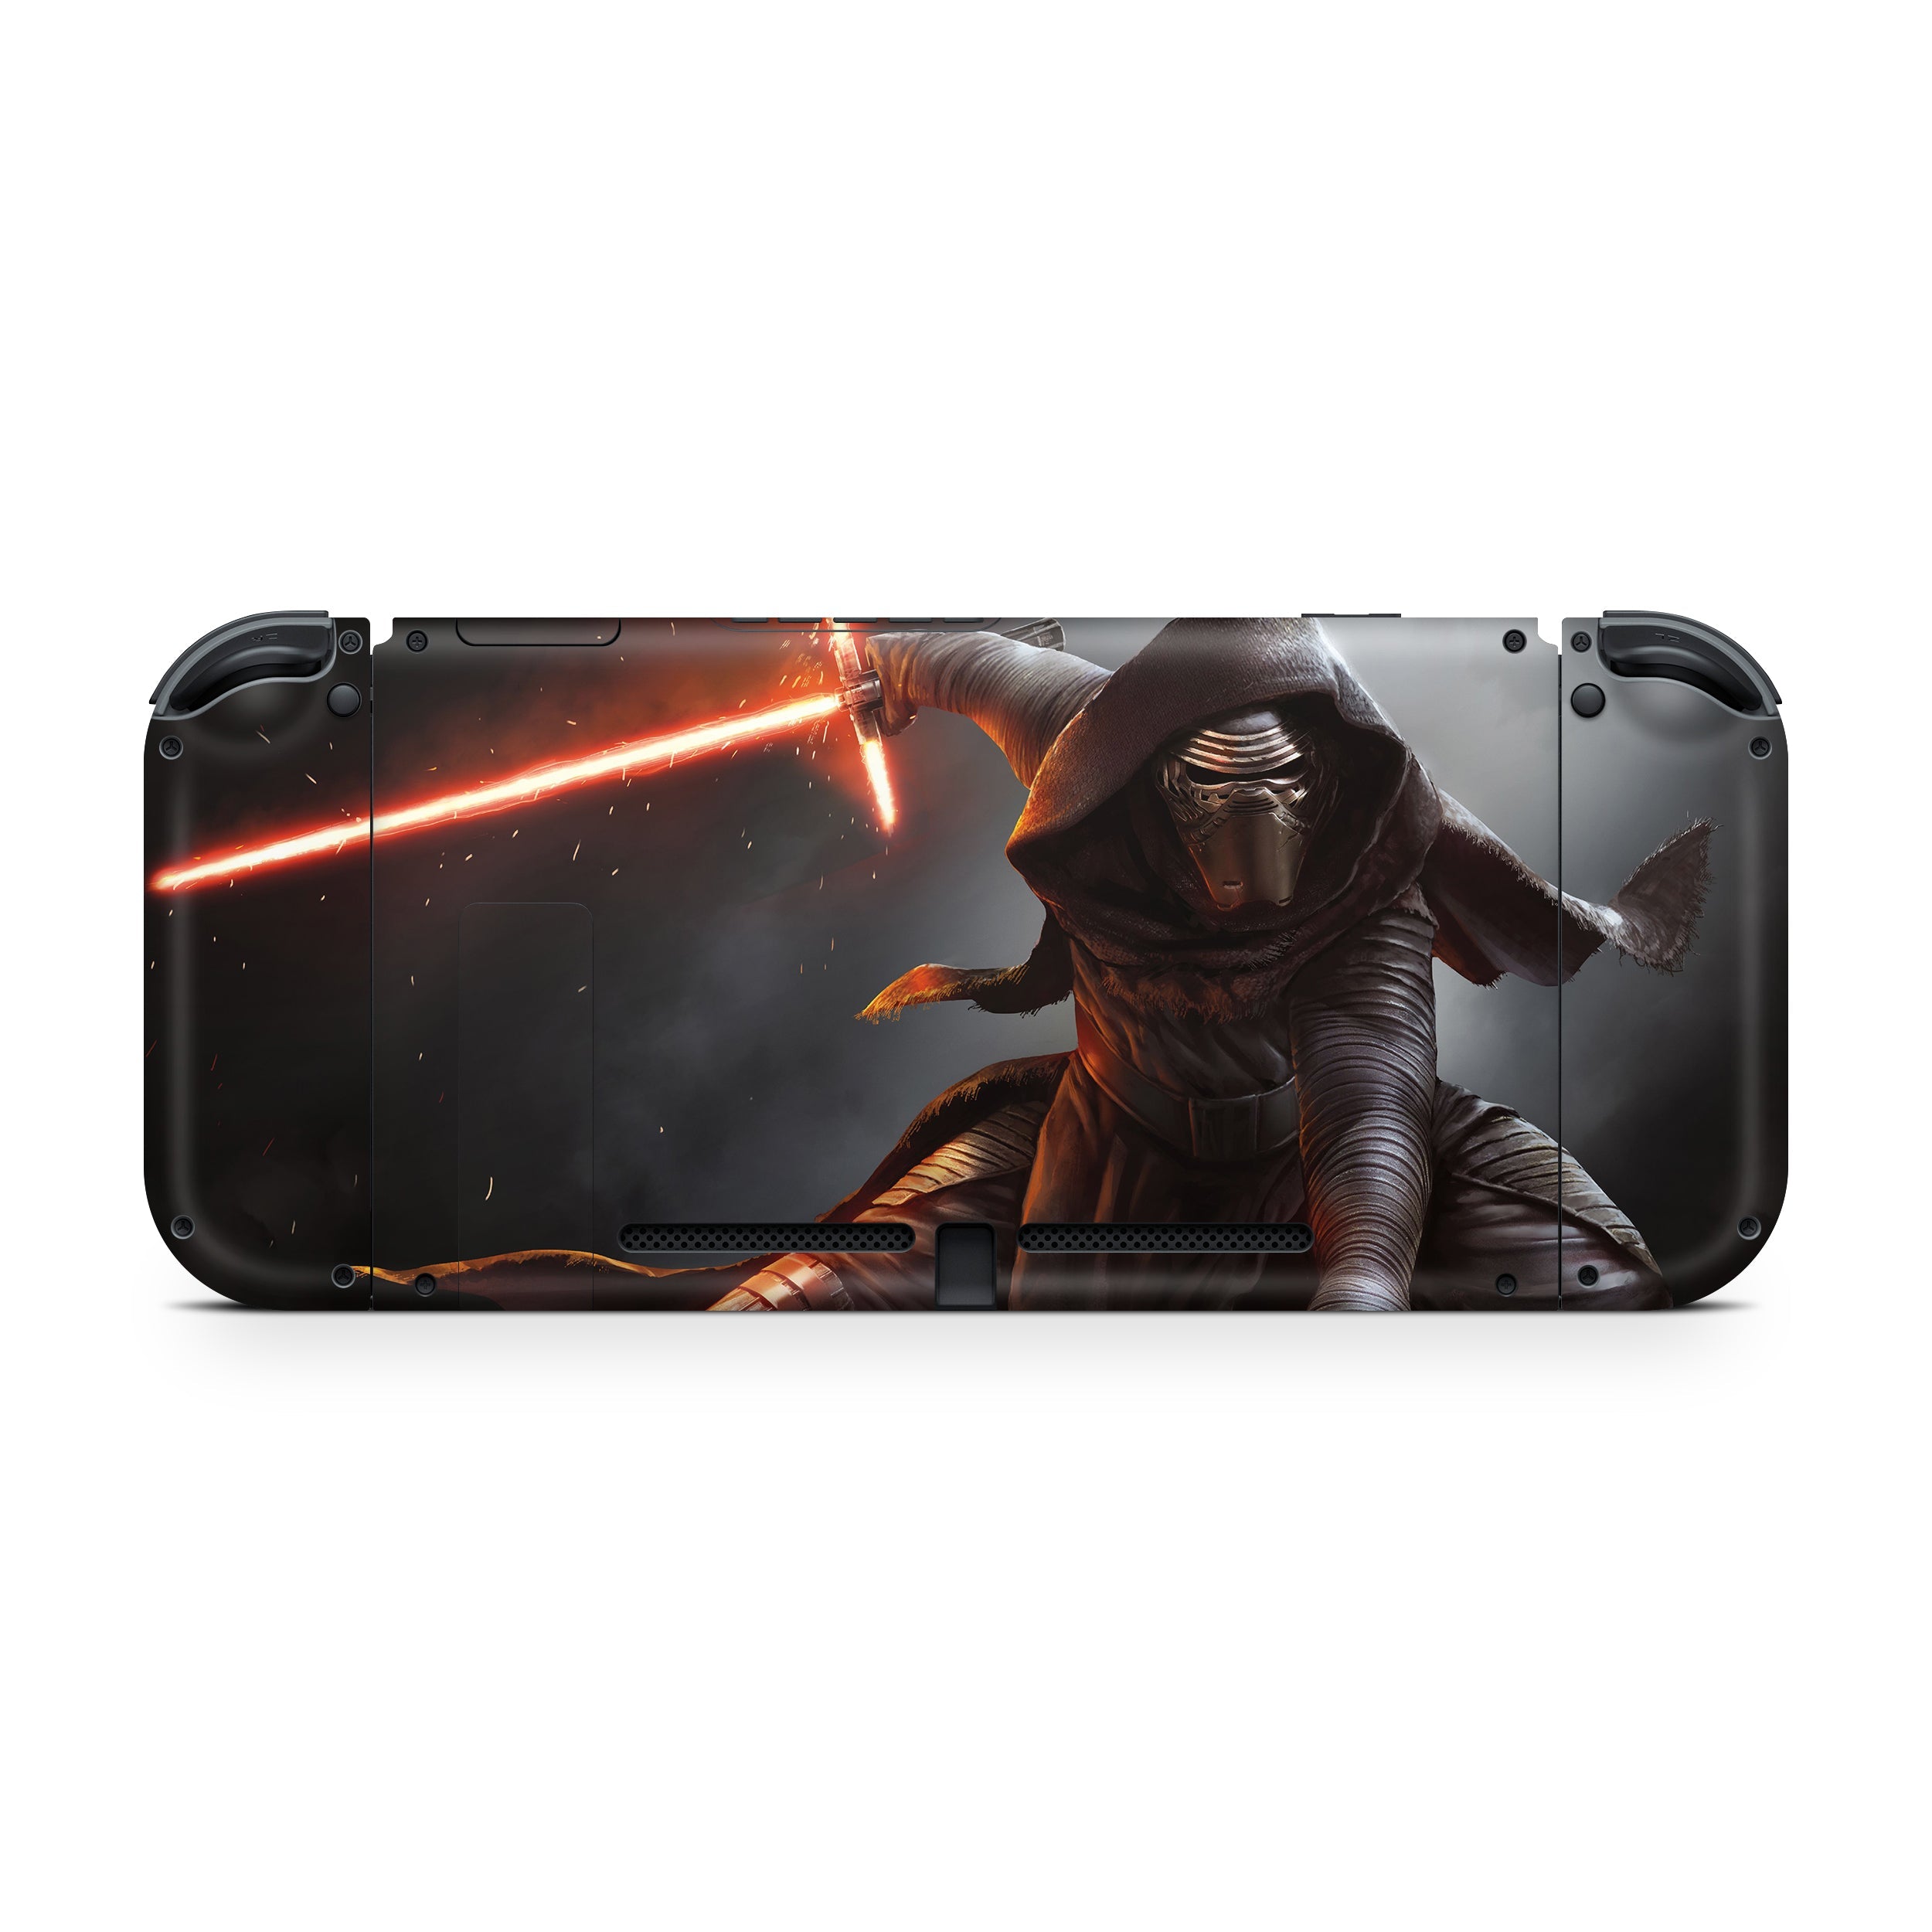 A video game skin featuring a Star Wars Kylo Ren design for the Nintendo Switch.